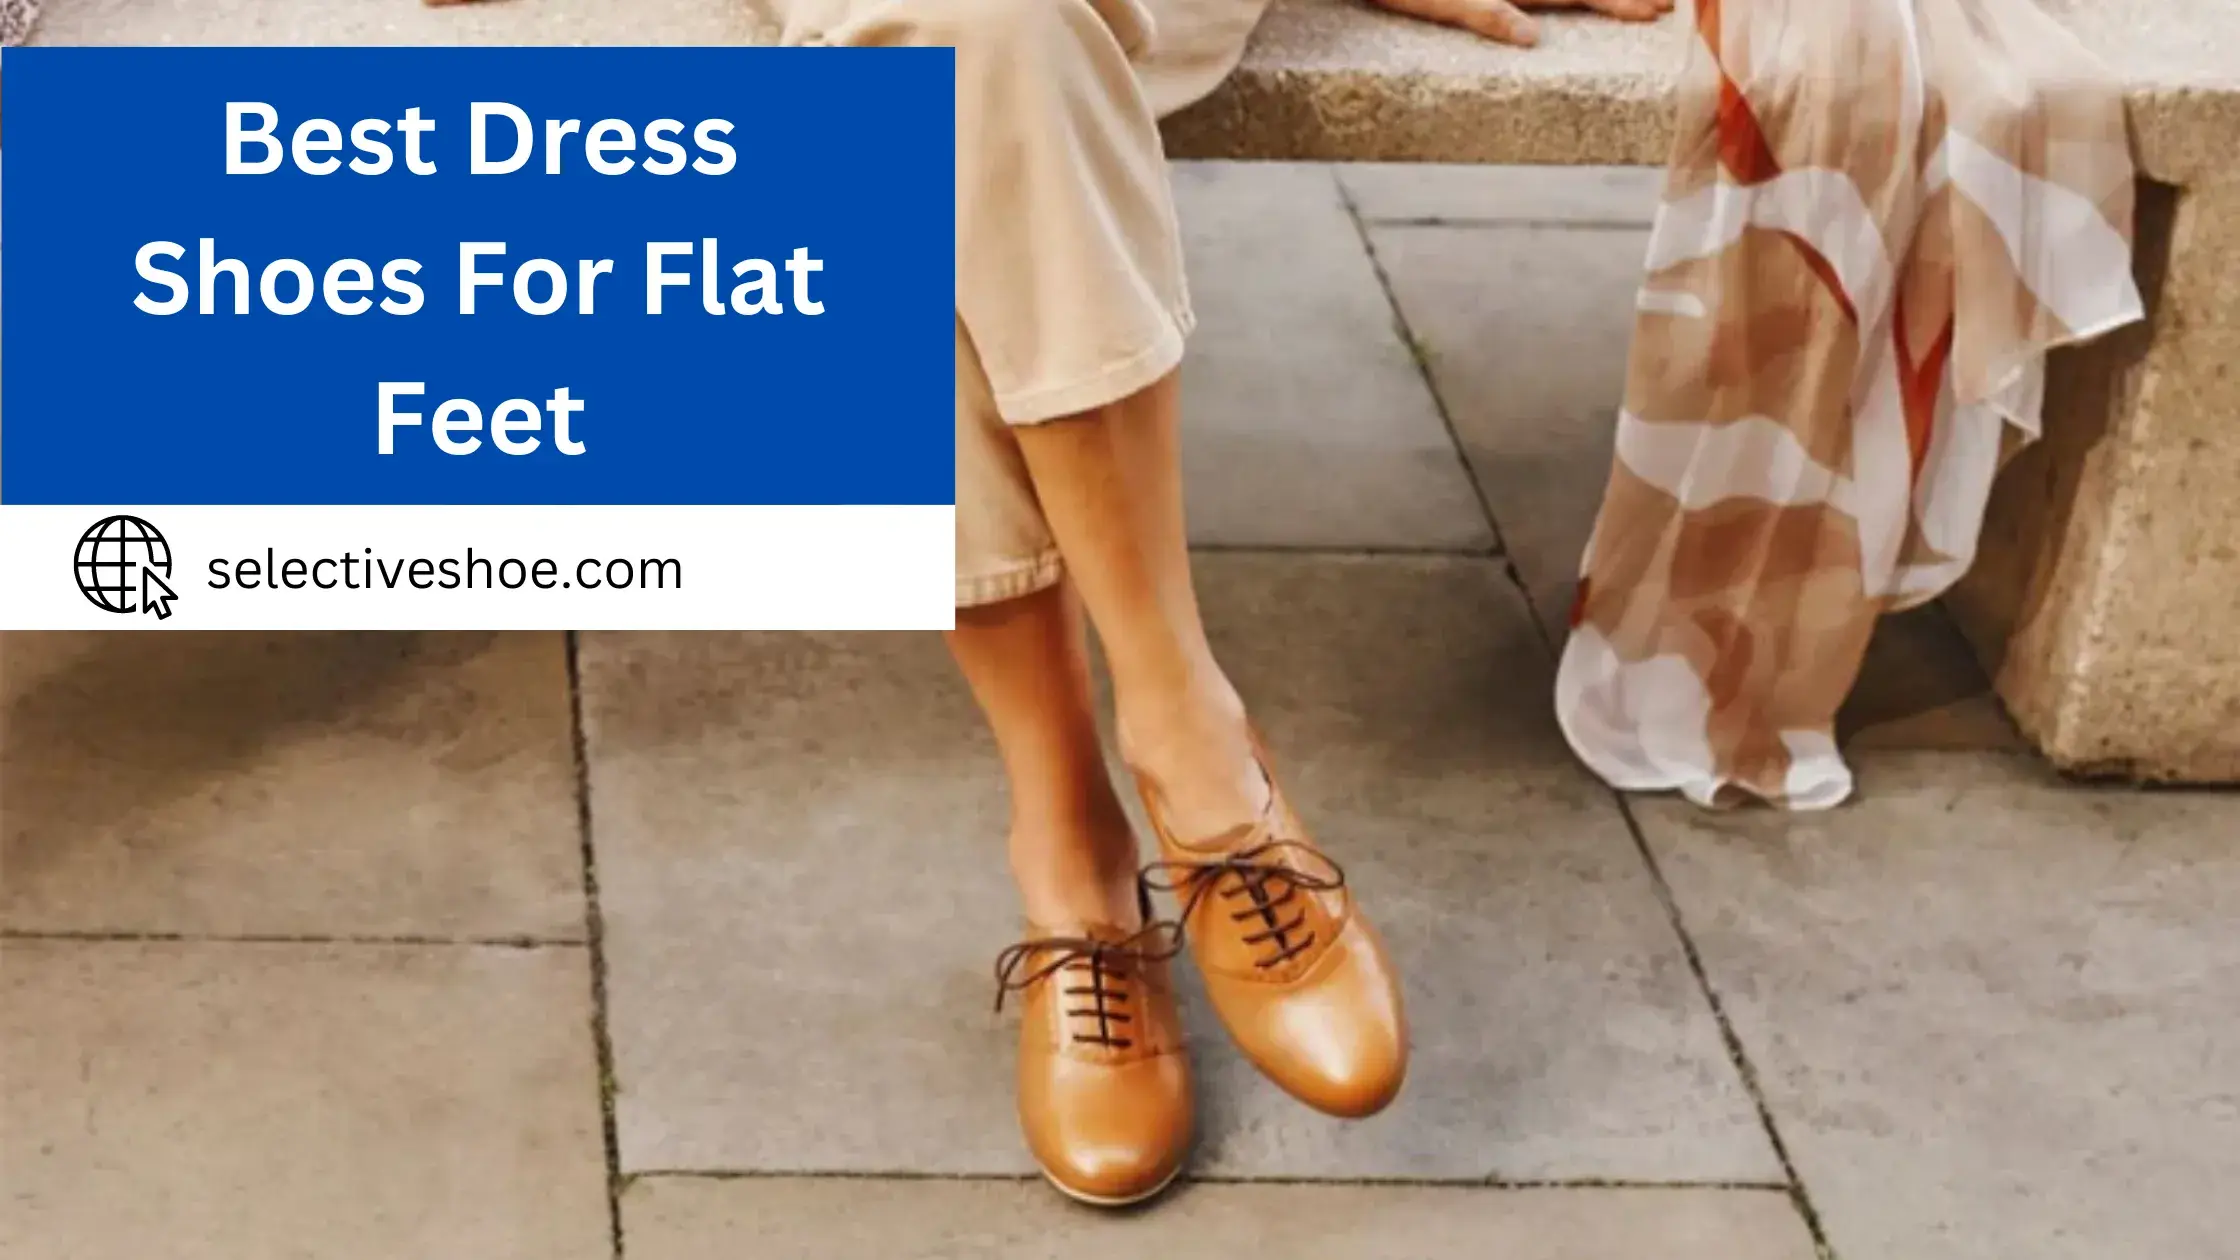 Best Dress Shoes For Flat Feet - (An In-Depth Guide)